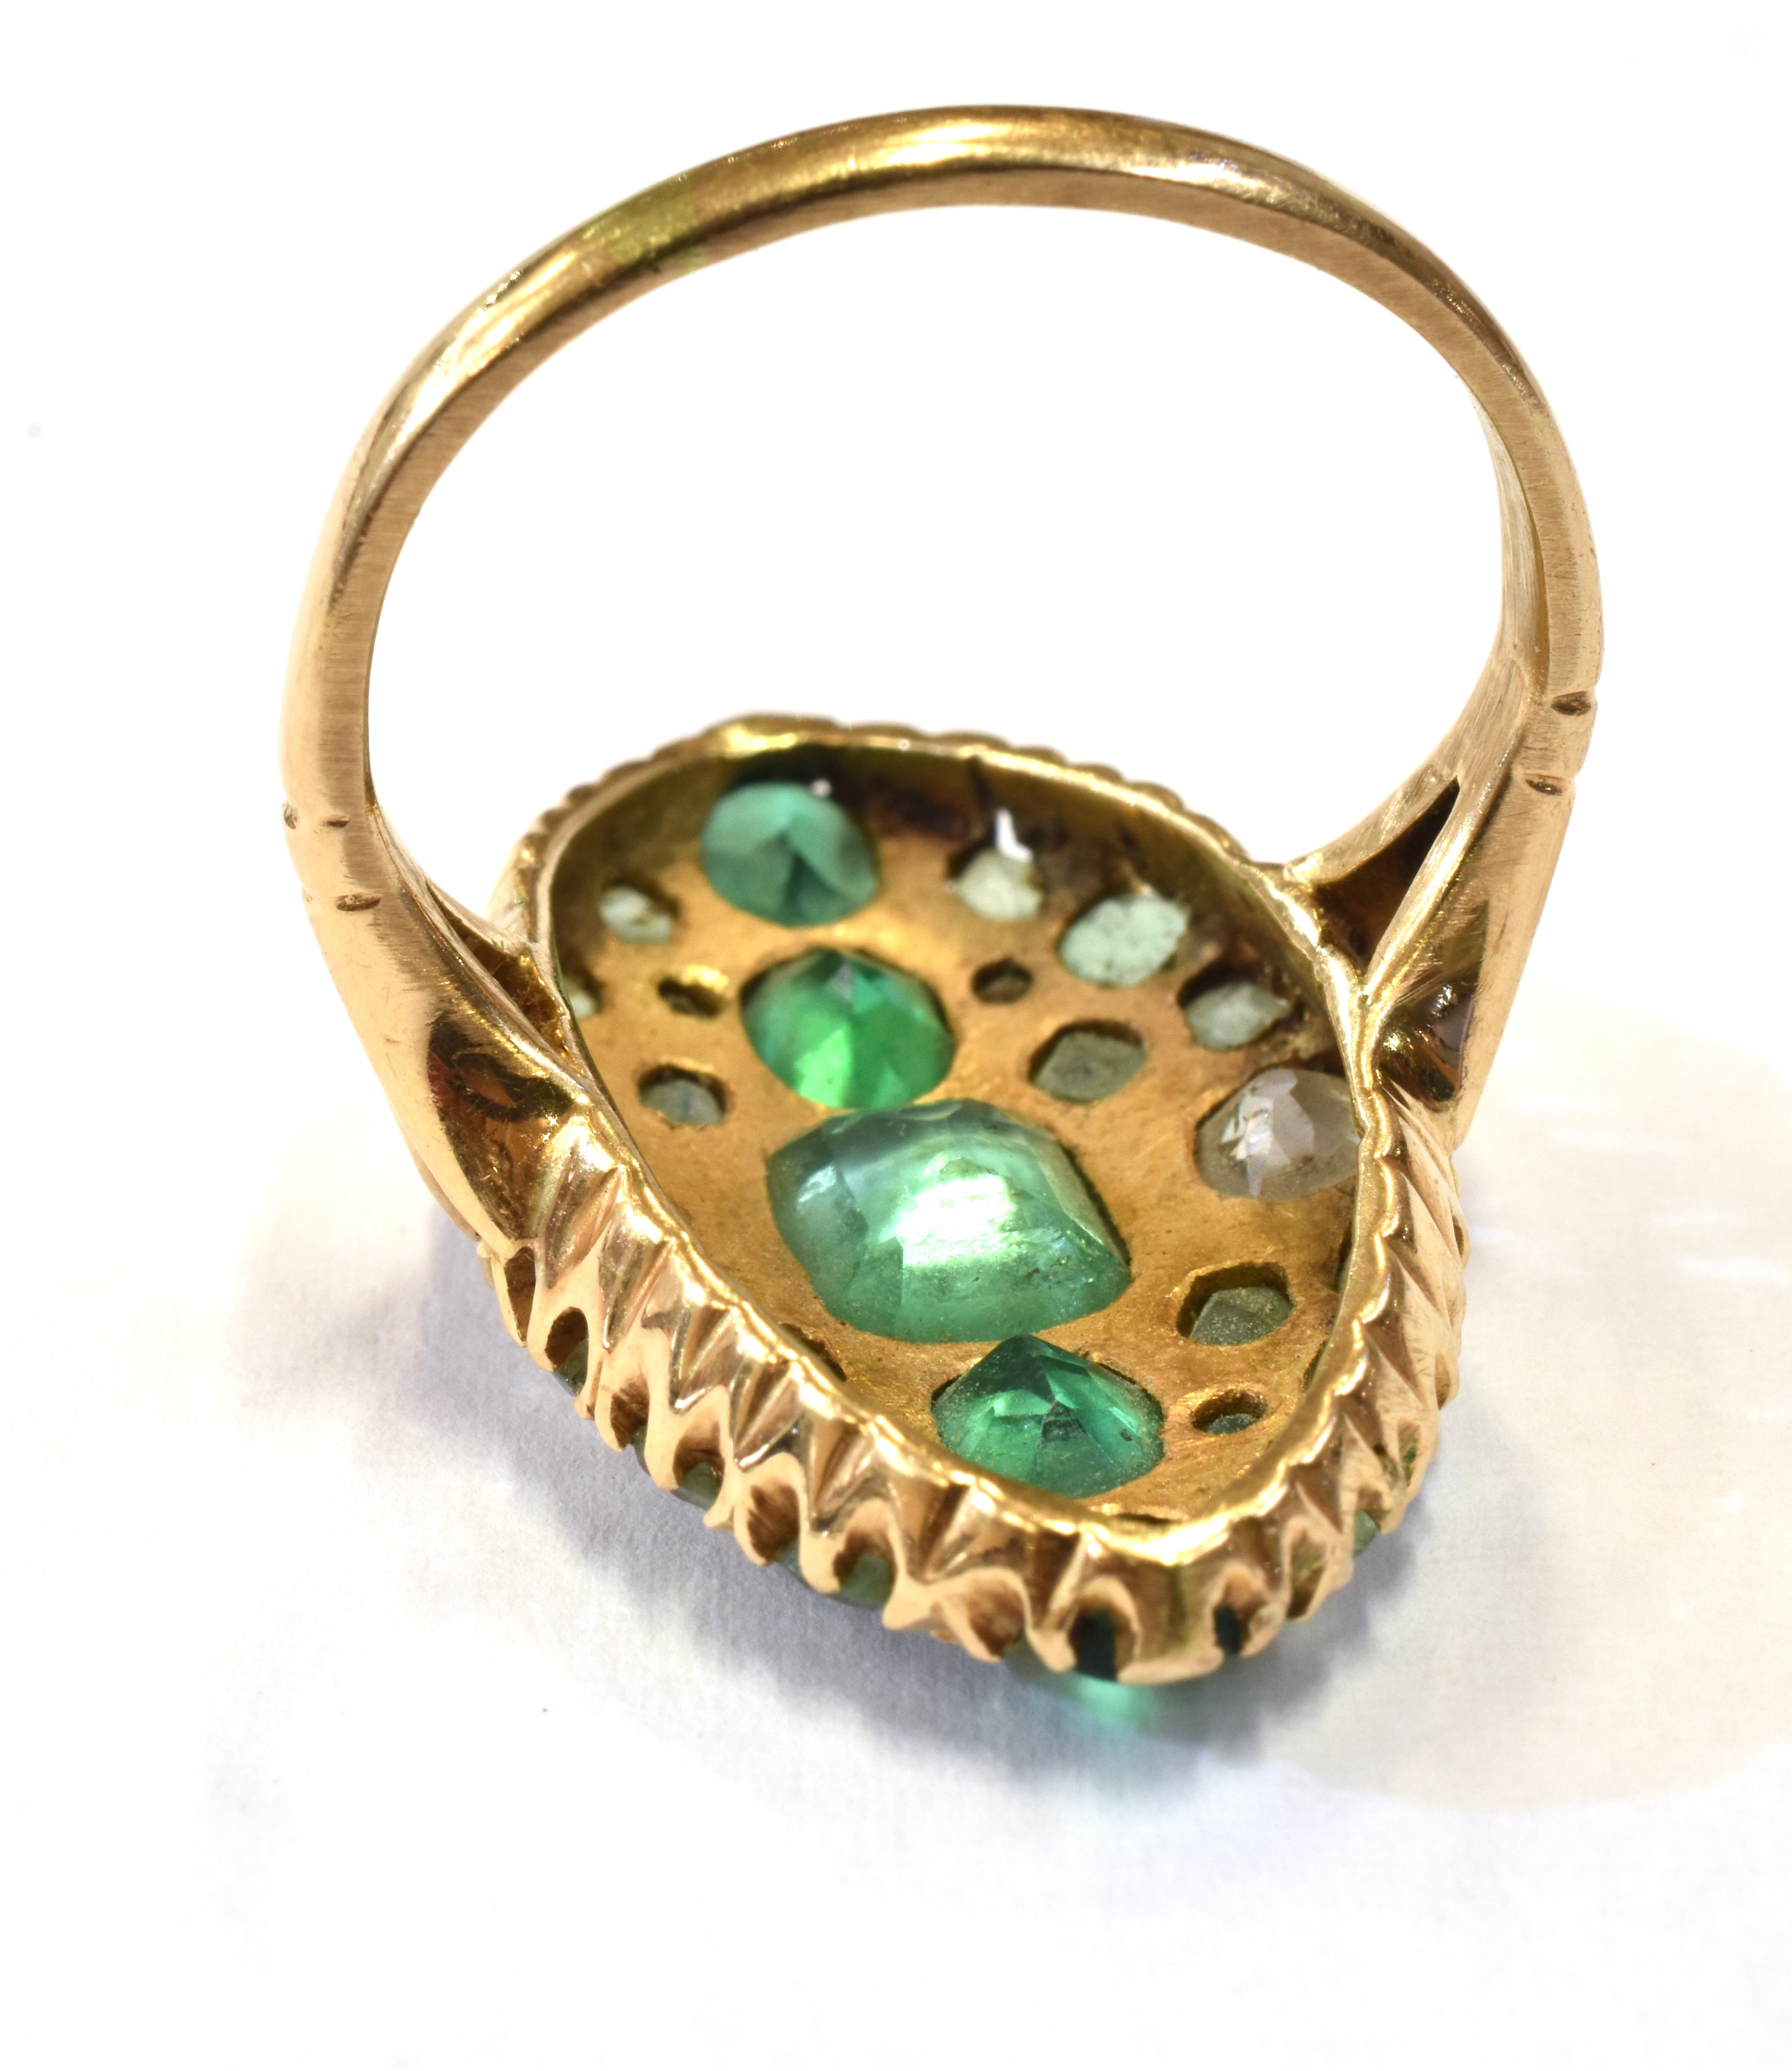 ANTIQUE 15CT GOLD EMERALD & DIAMOND RING 29.5 x 17.1mm navette shaped ring, mille grain set with a - Bild 2 aus 2